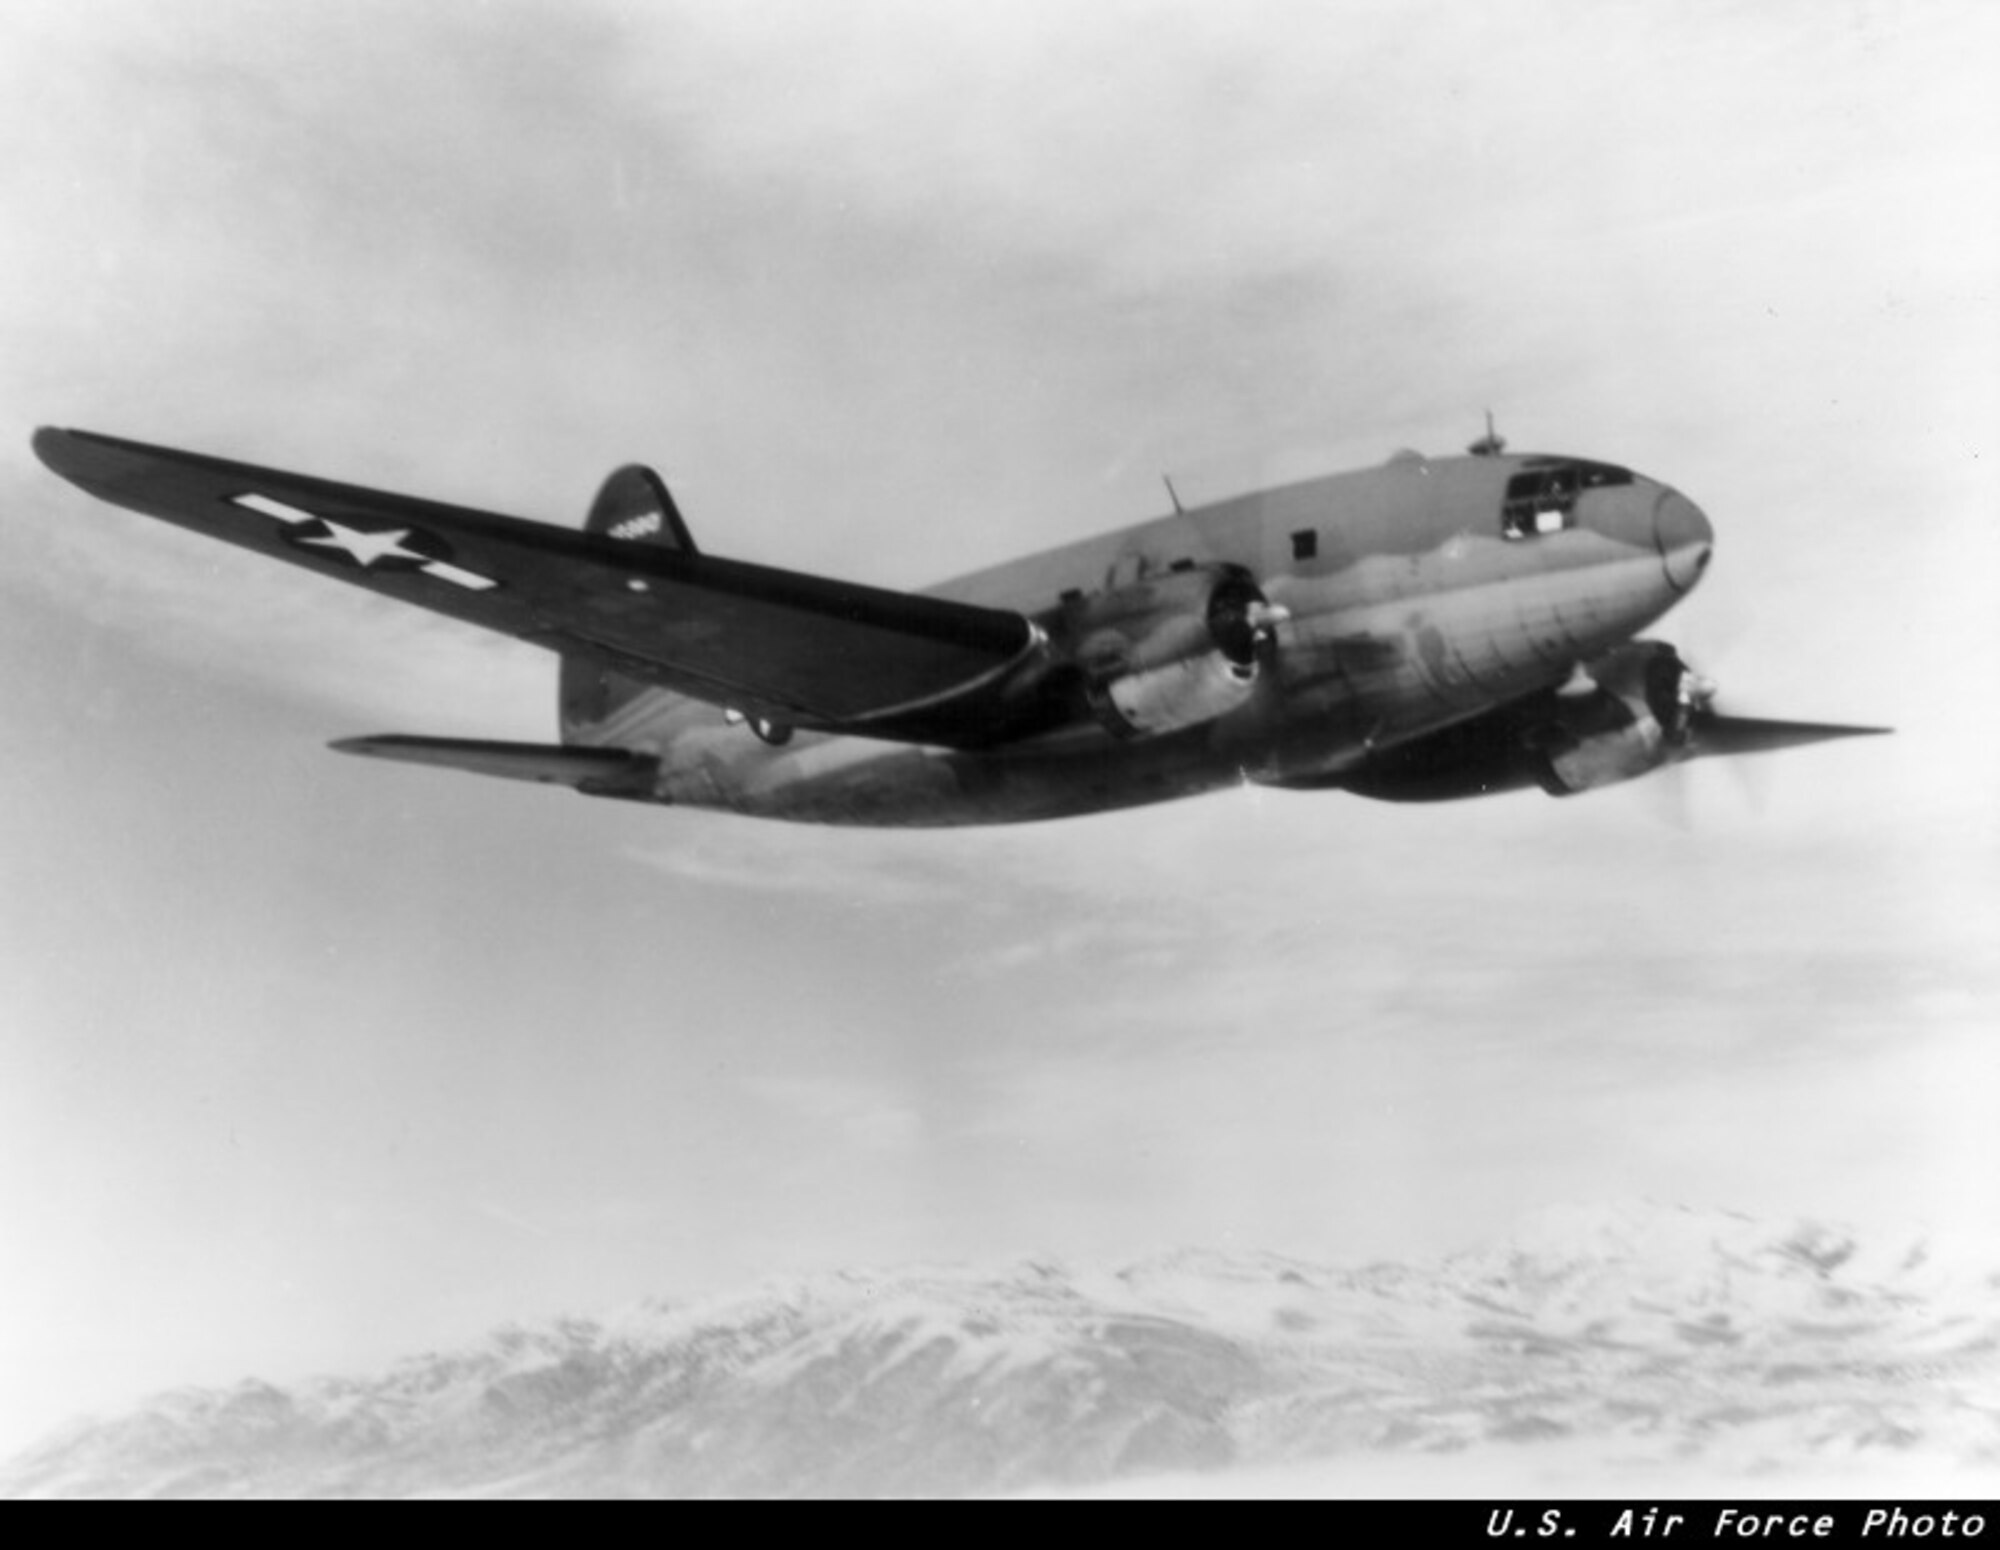 The C-46 Commando gained fame by flying the treacherous Himalayan supply routes during WWII, known as the Hump.  The C-46 was normally operated by a crew of four and could carry 50 troops and transport 15,000 pounds of cargo.  (USAF Historical Photo)